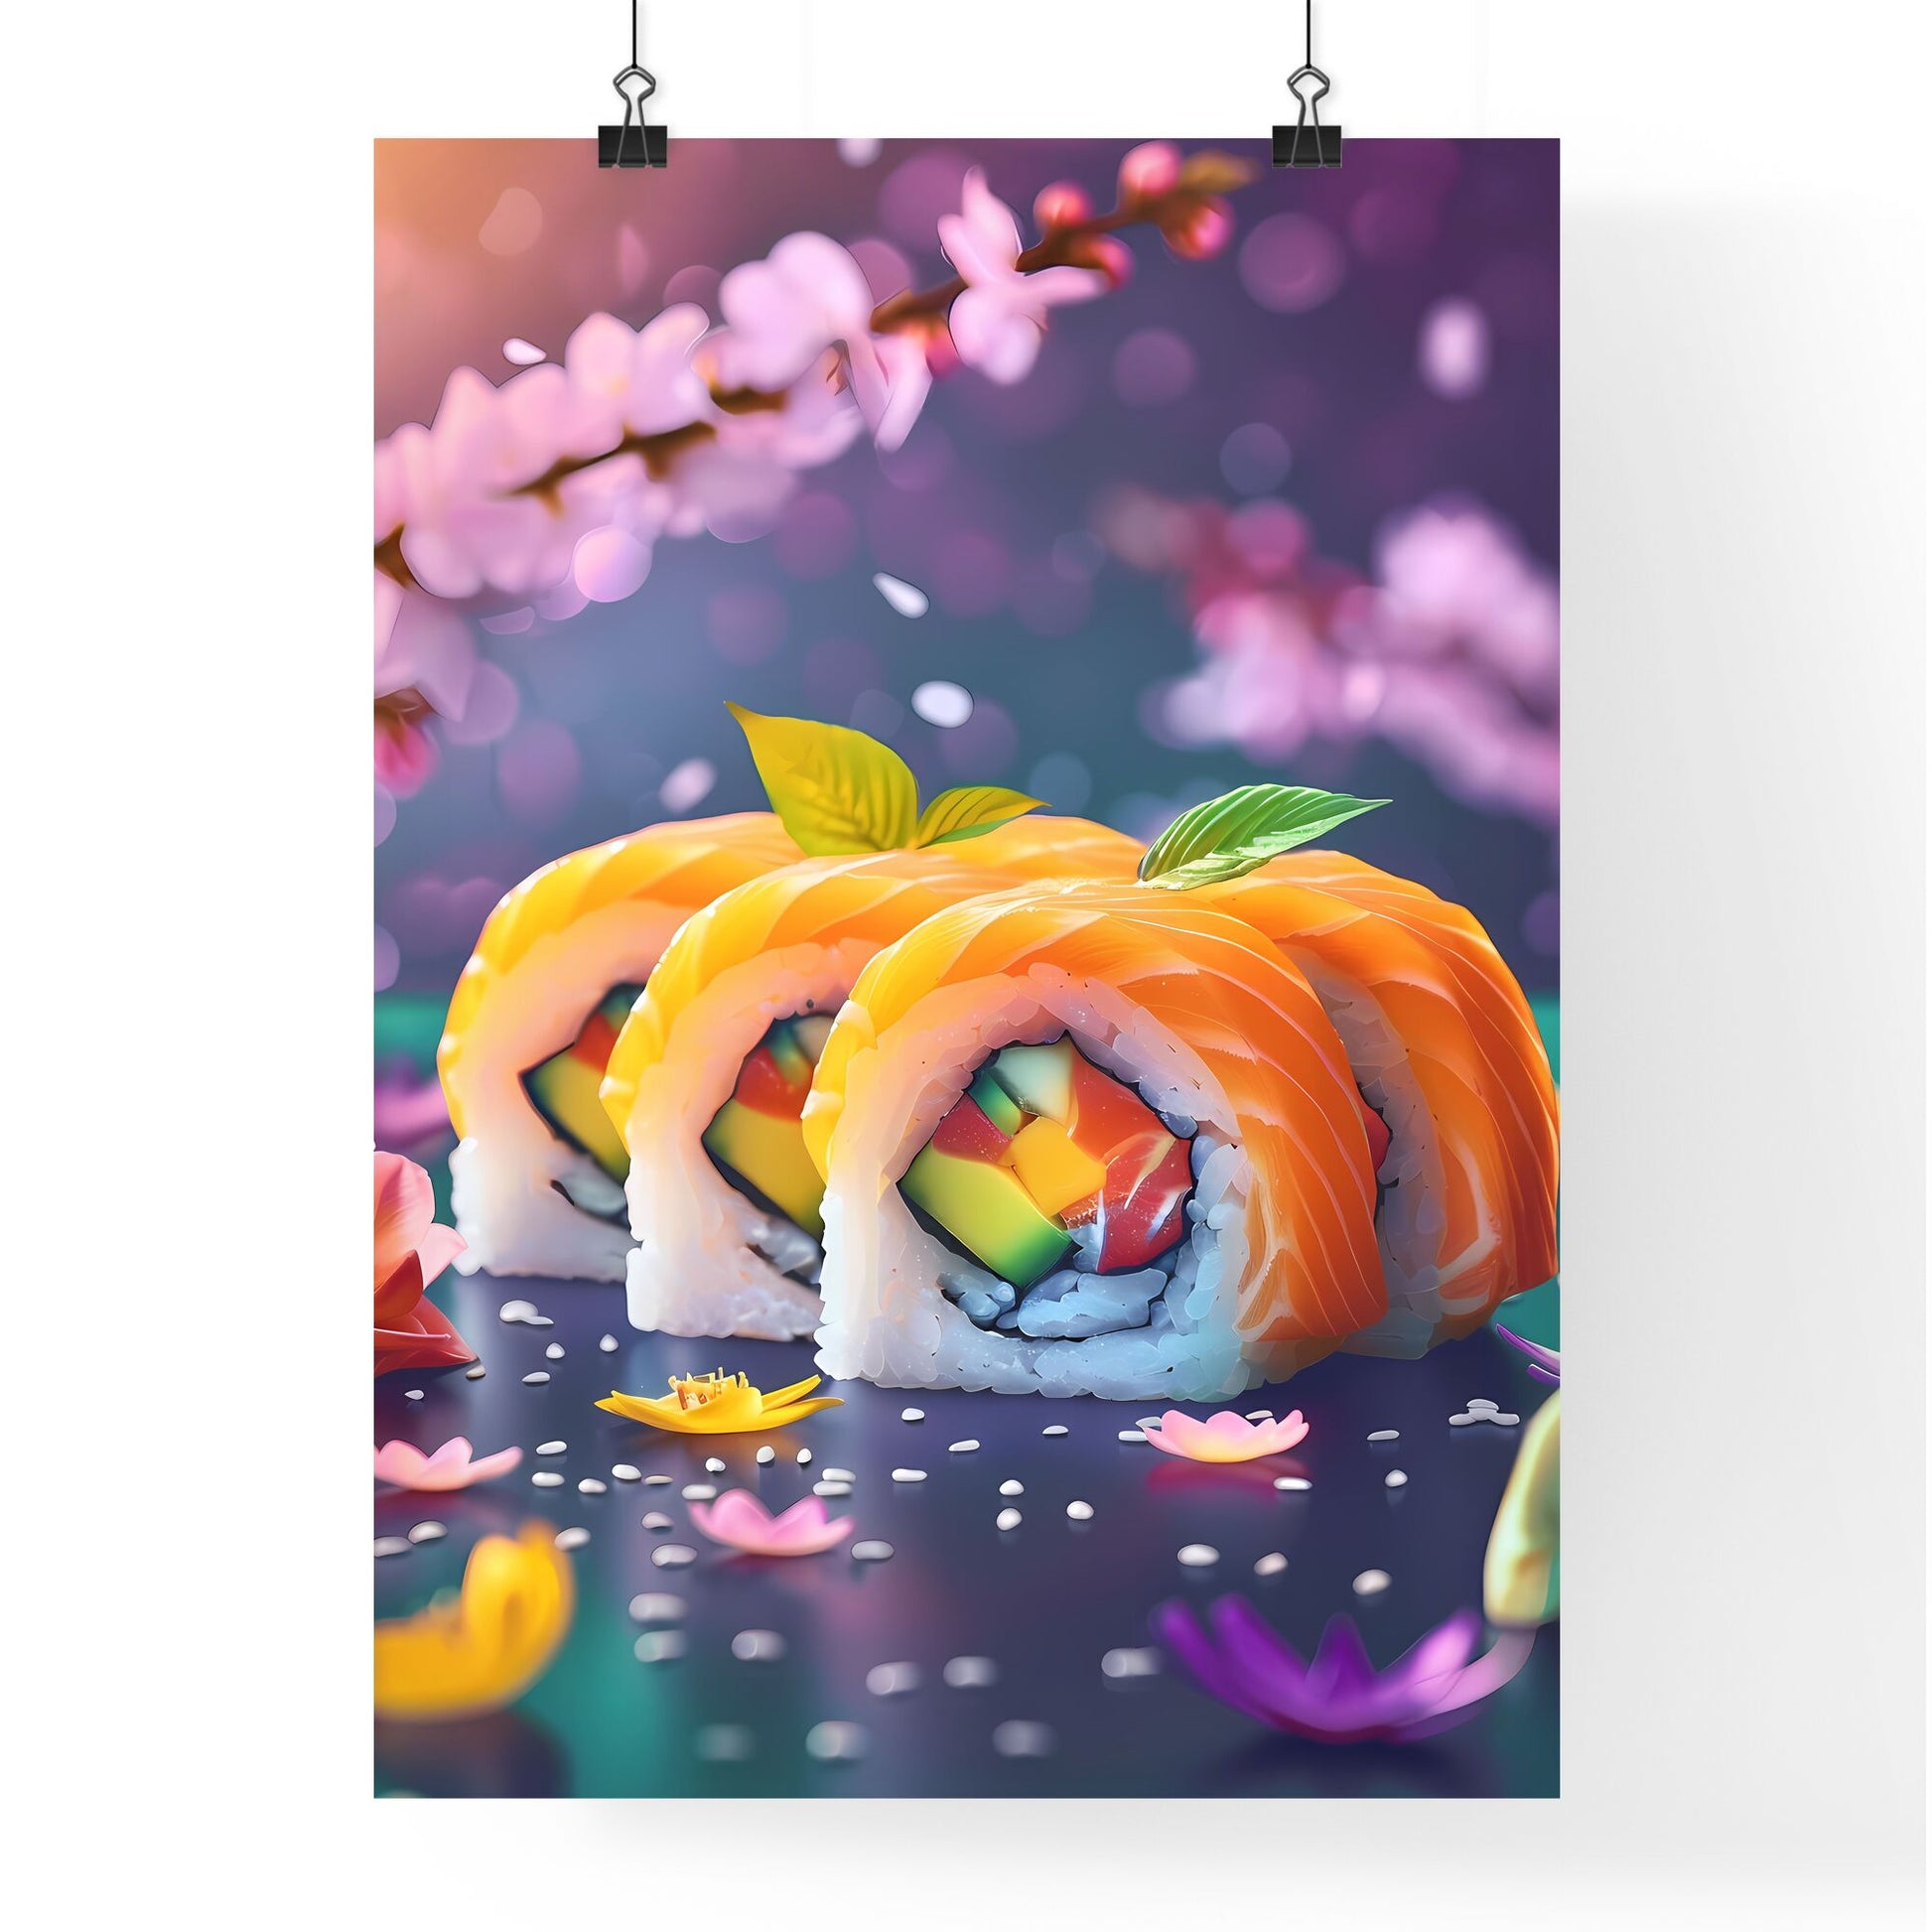 Sushi Rolls Art: Vibrant Painting Against Spring Nature with Flowers, Leaves, Blue Surface, Purple, Yellow, White Default Title